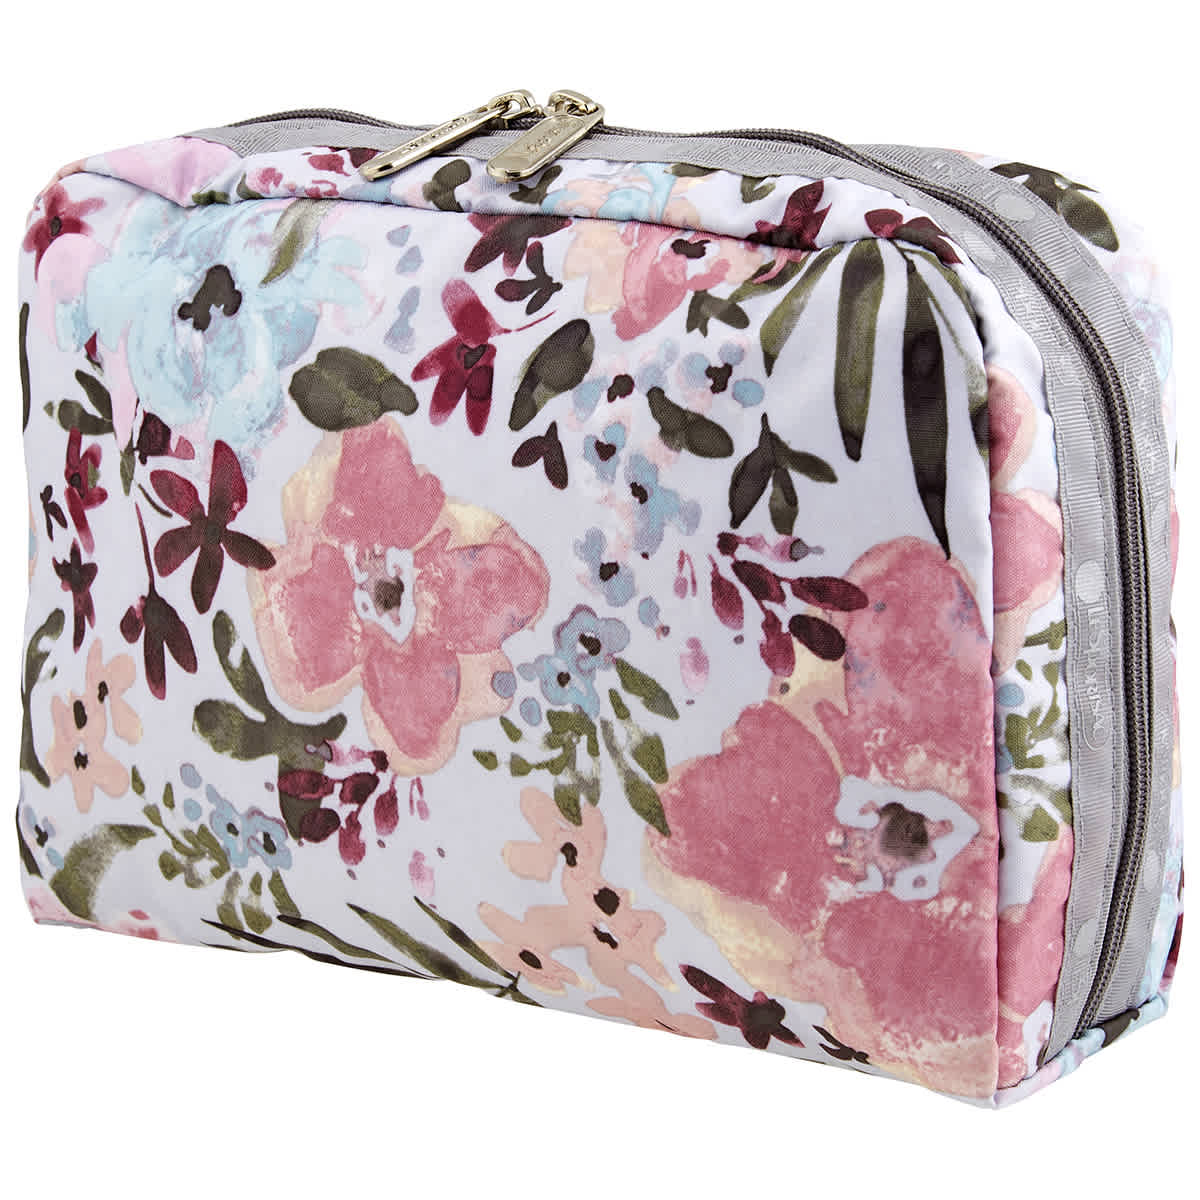 Le Sportsac Multicolor Rectangular Cosmetic Pouch